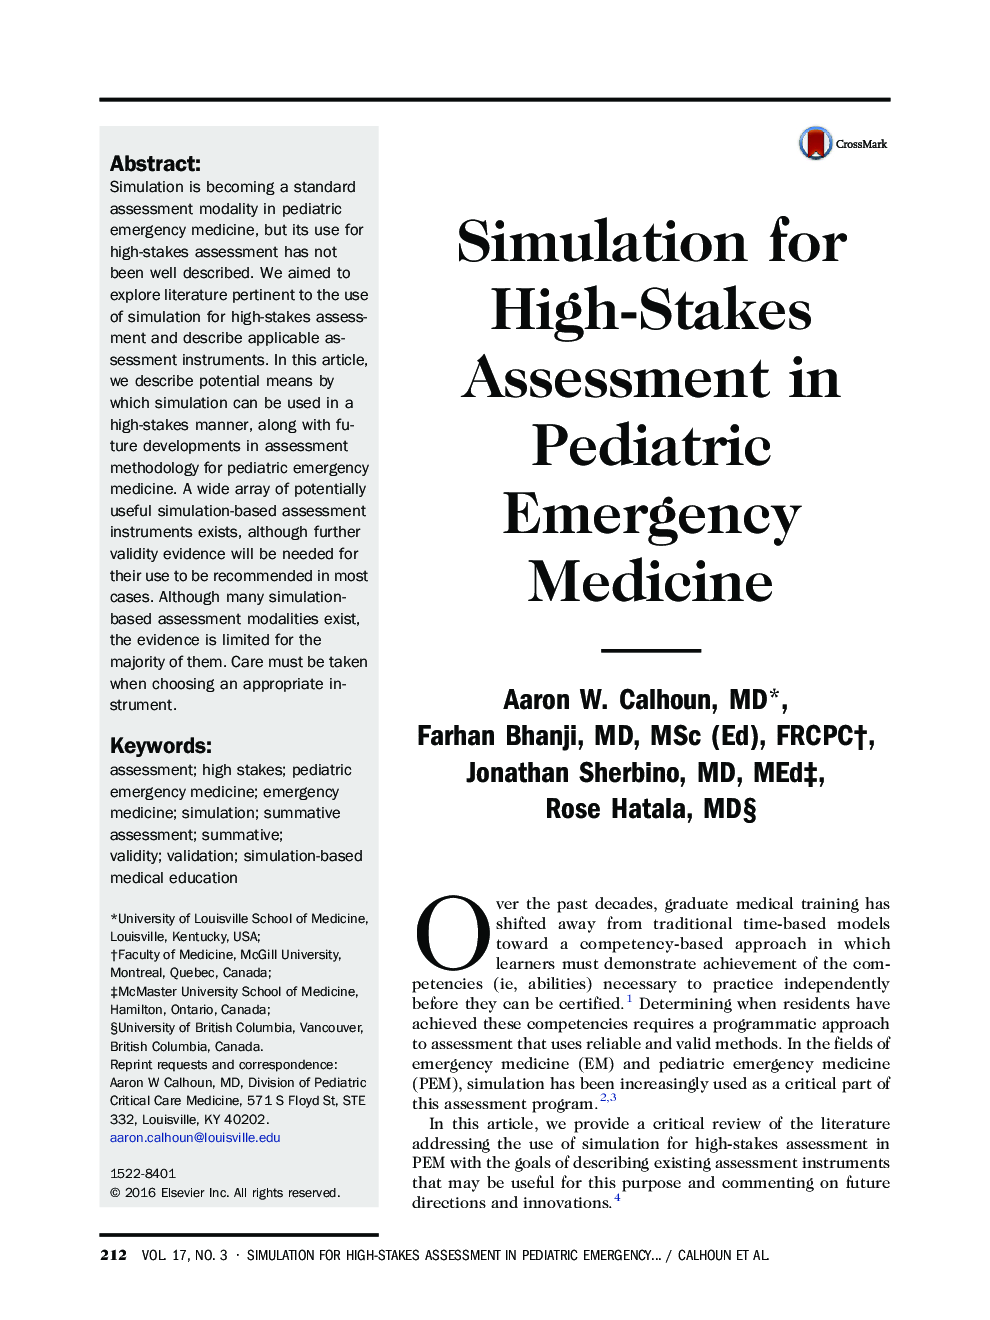 Simulation for High-Stakes Assessment in Pediatric Emergency Medicine